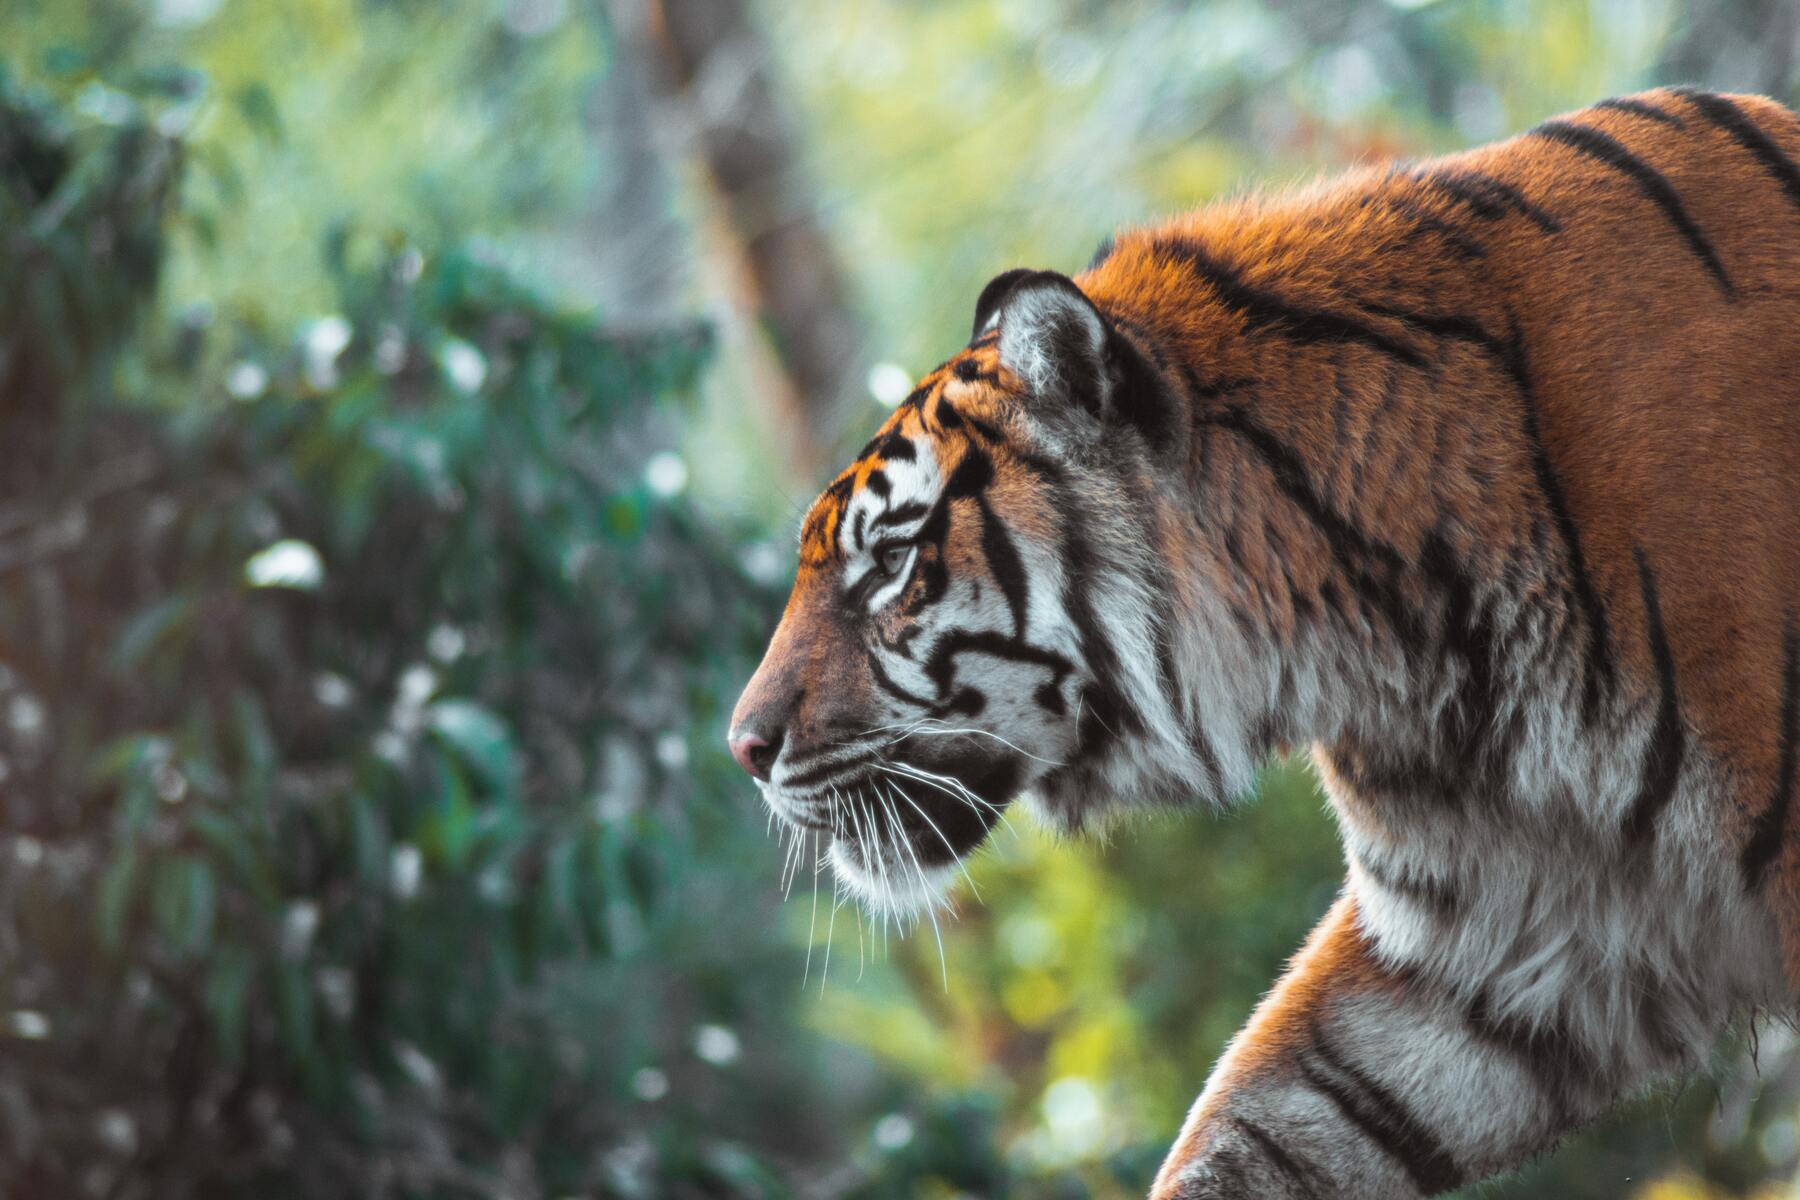 Report: At Least 150 Tigers are Killed by Poachers Every Year